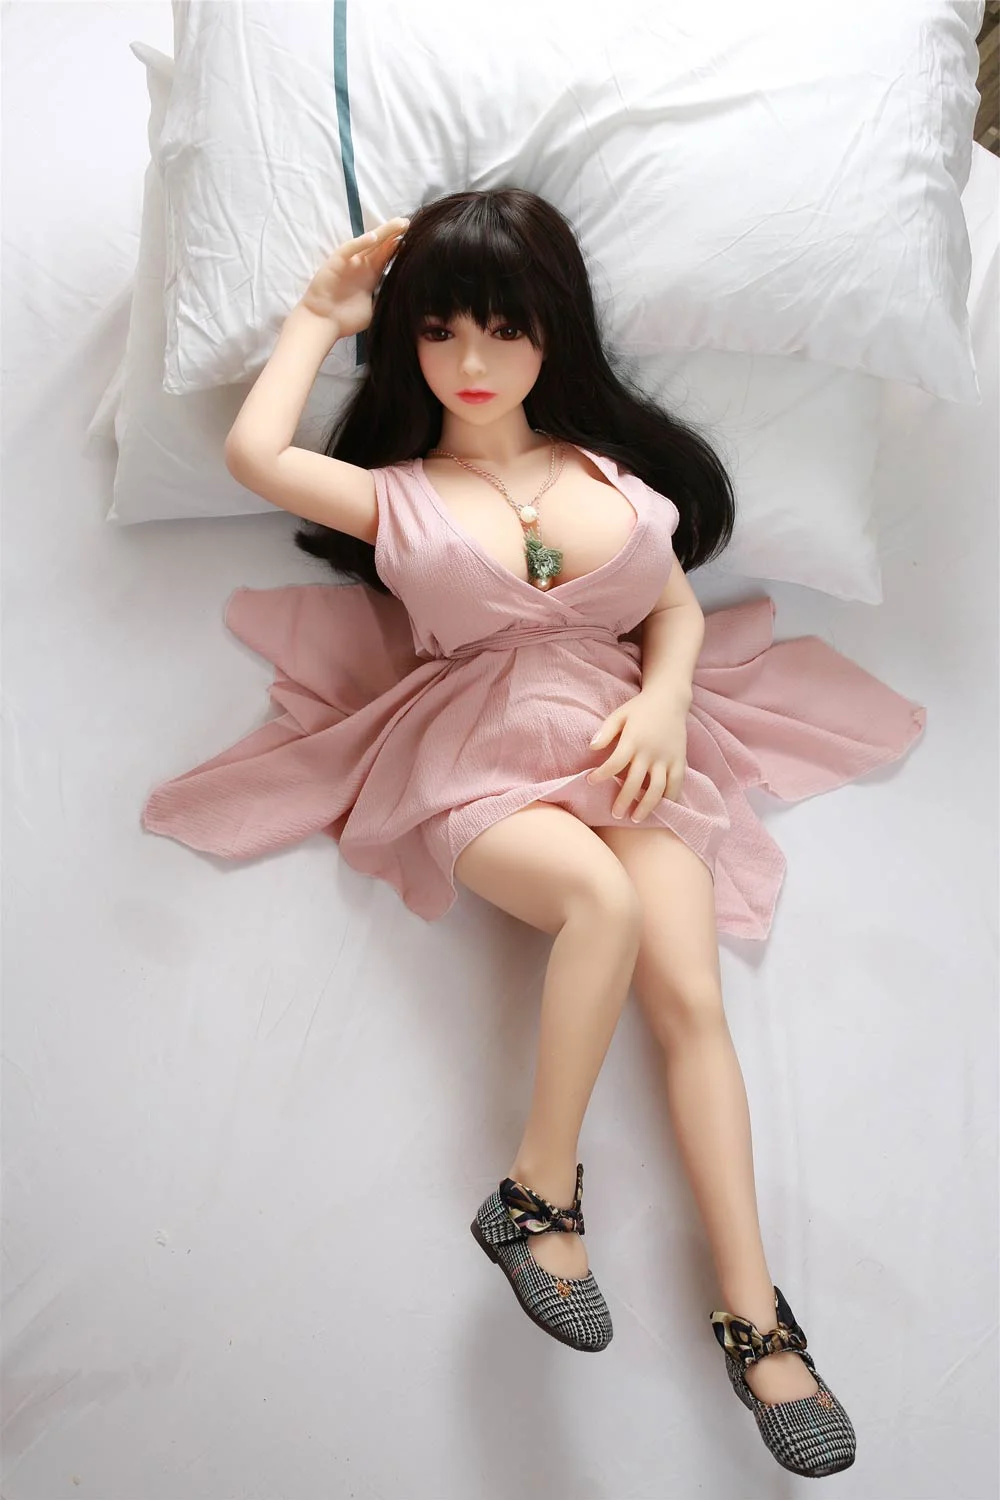 Mini sex doll lying on the bed in shoes